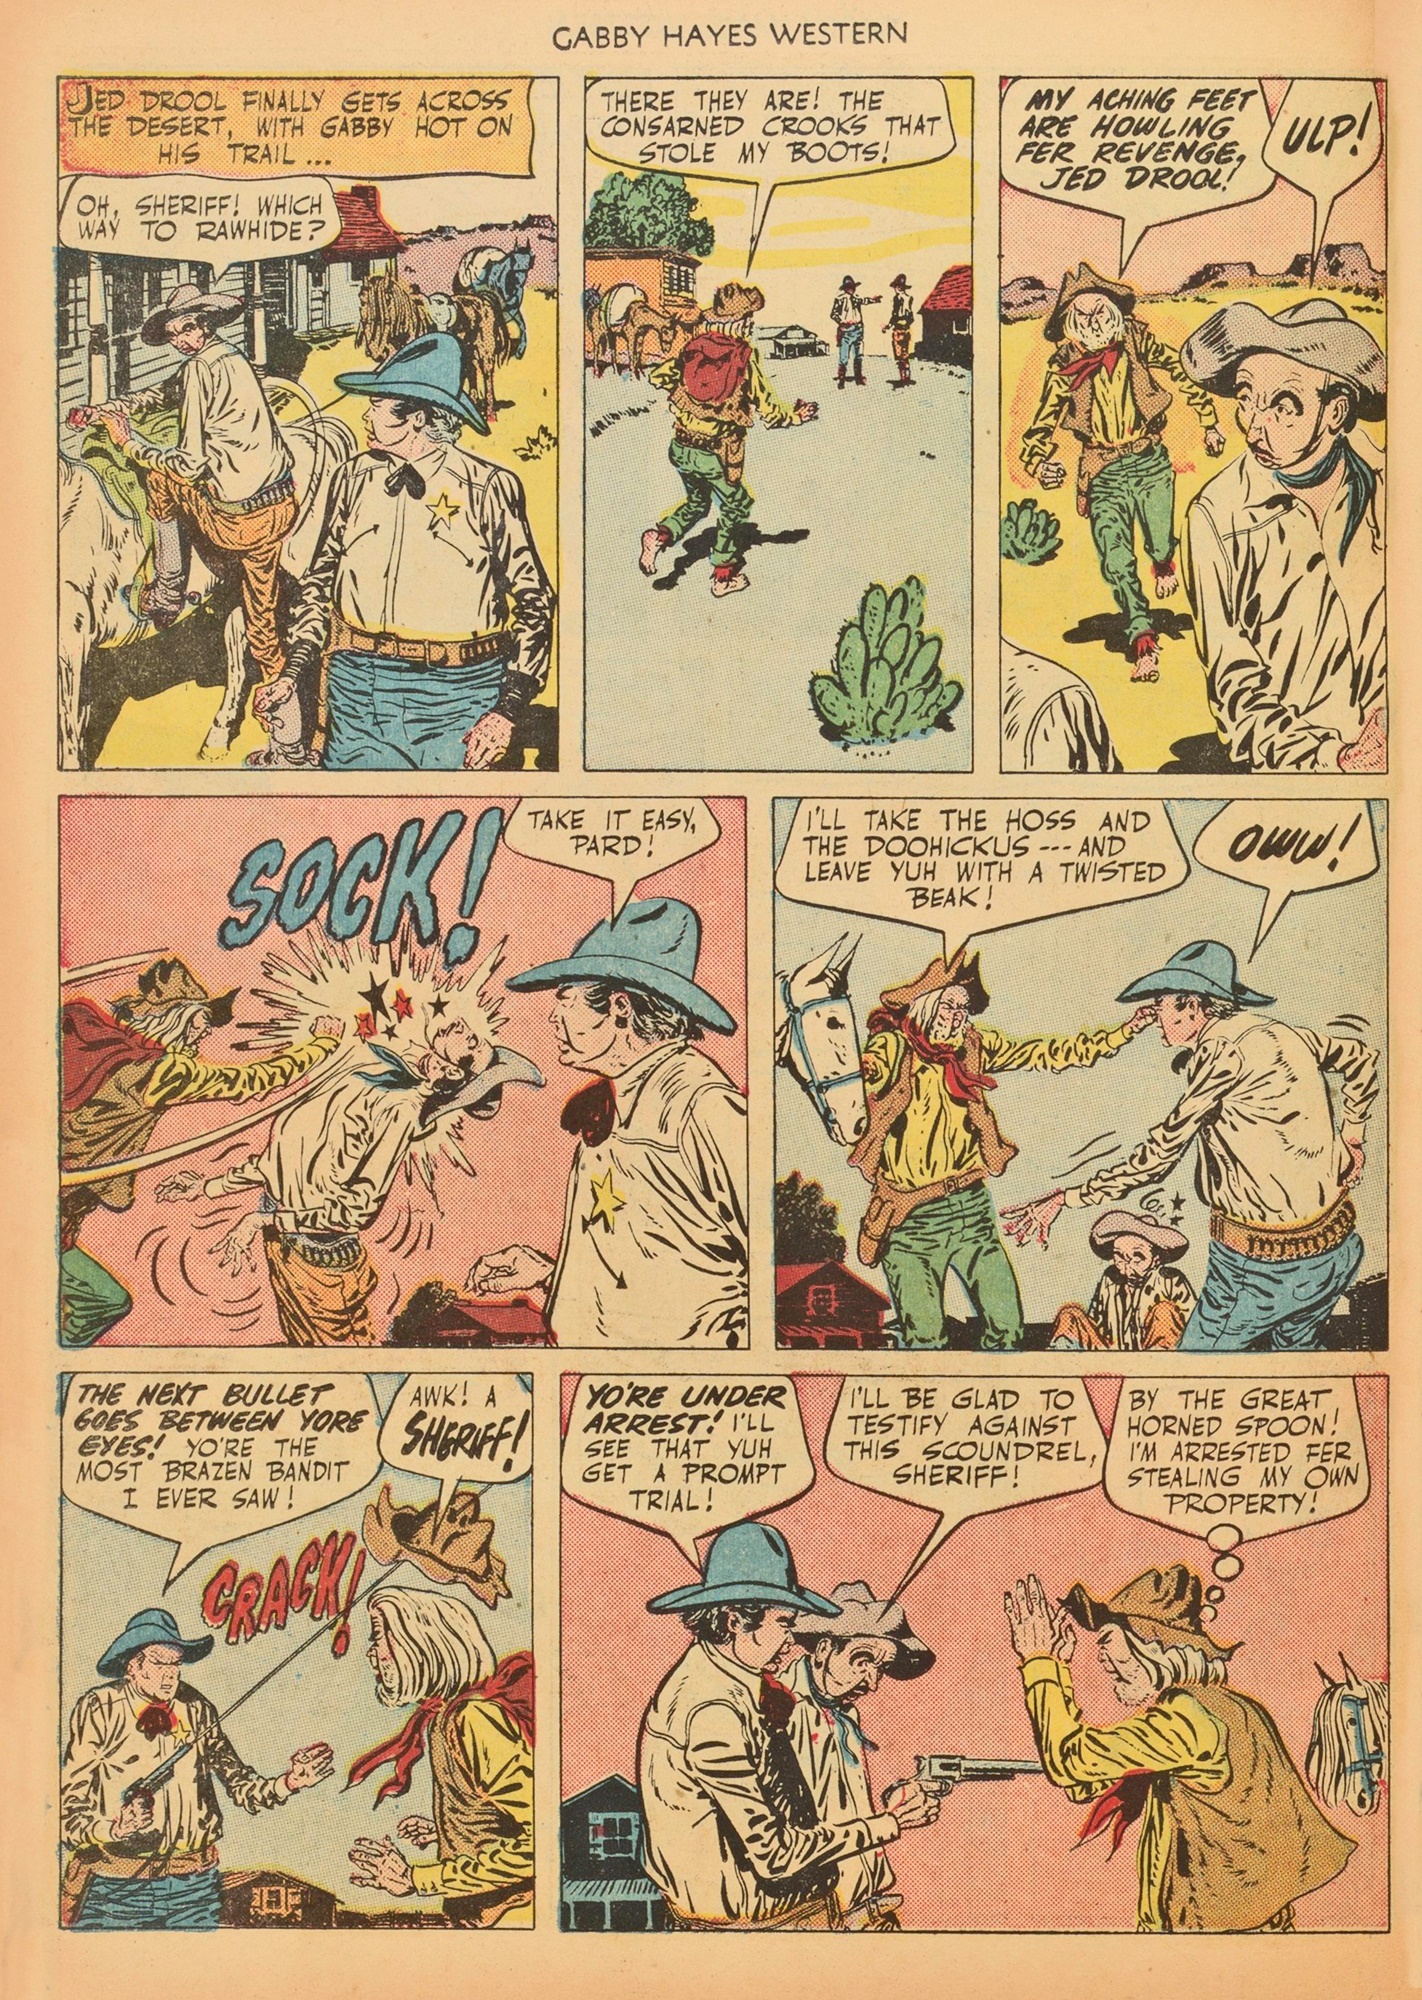 Read online Gabby Hayes Western comic -  Issue #25 - 30